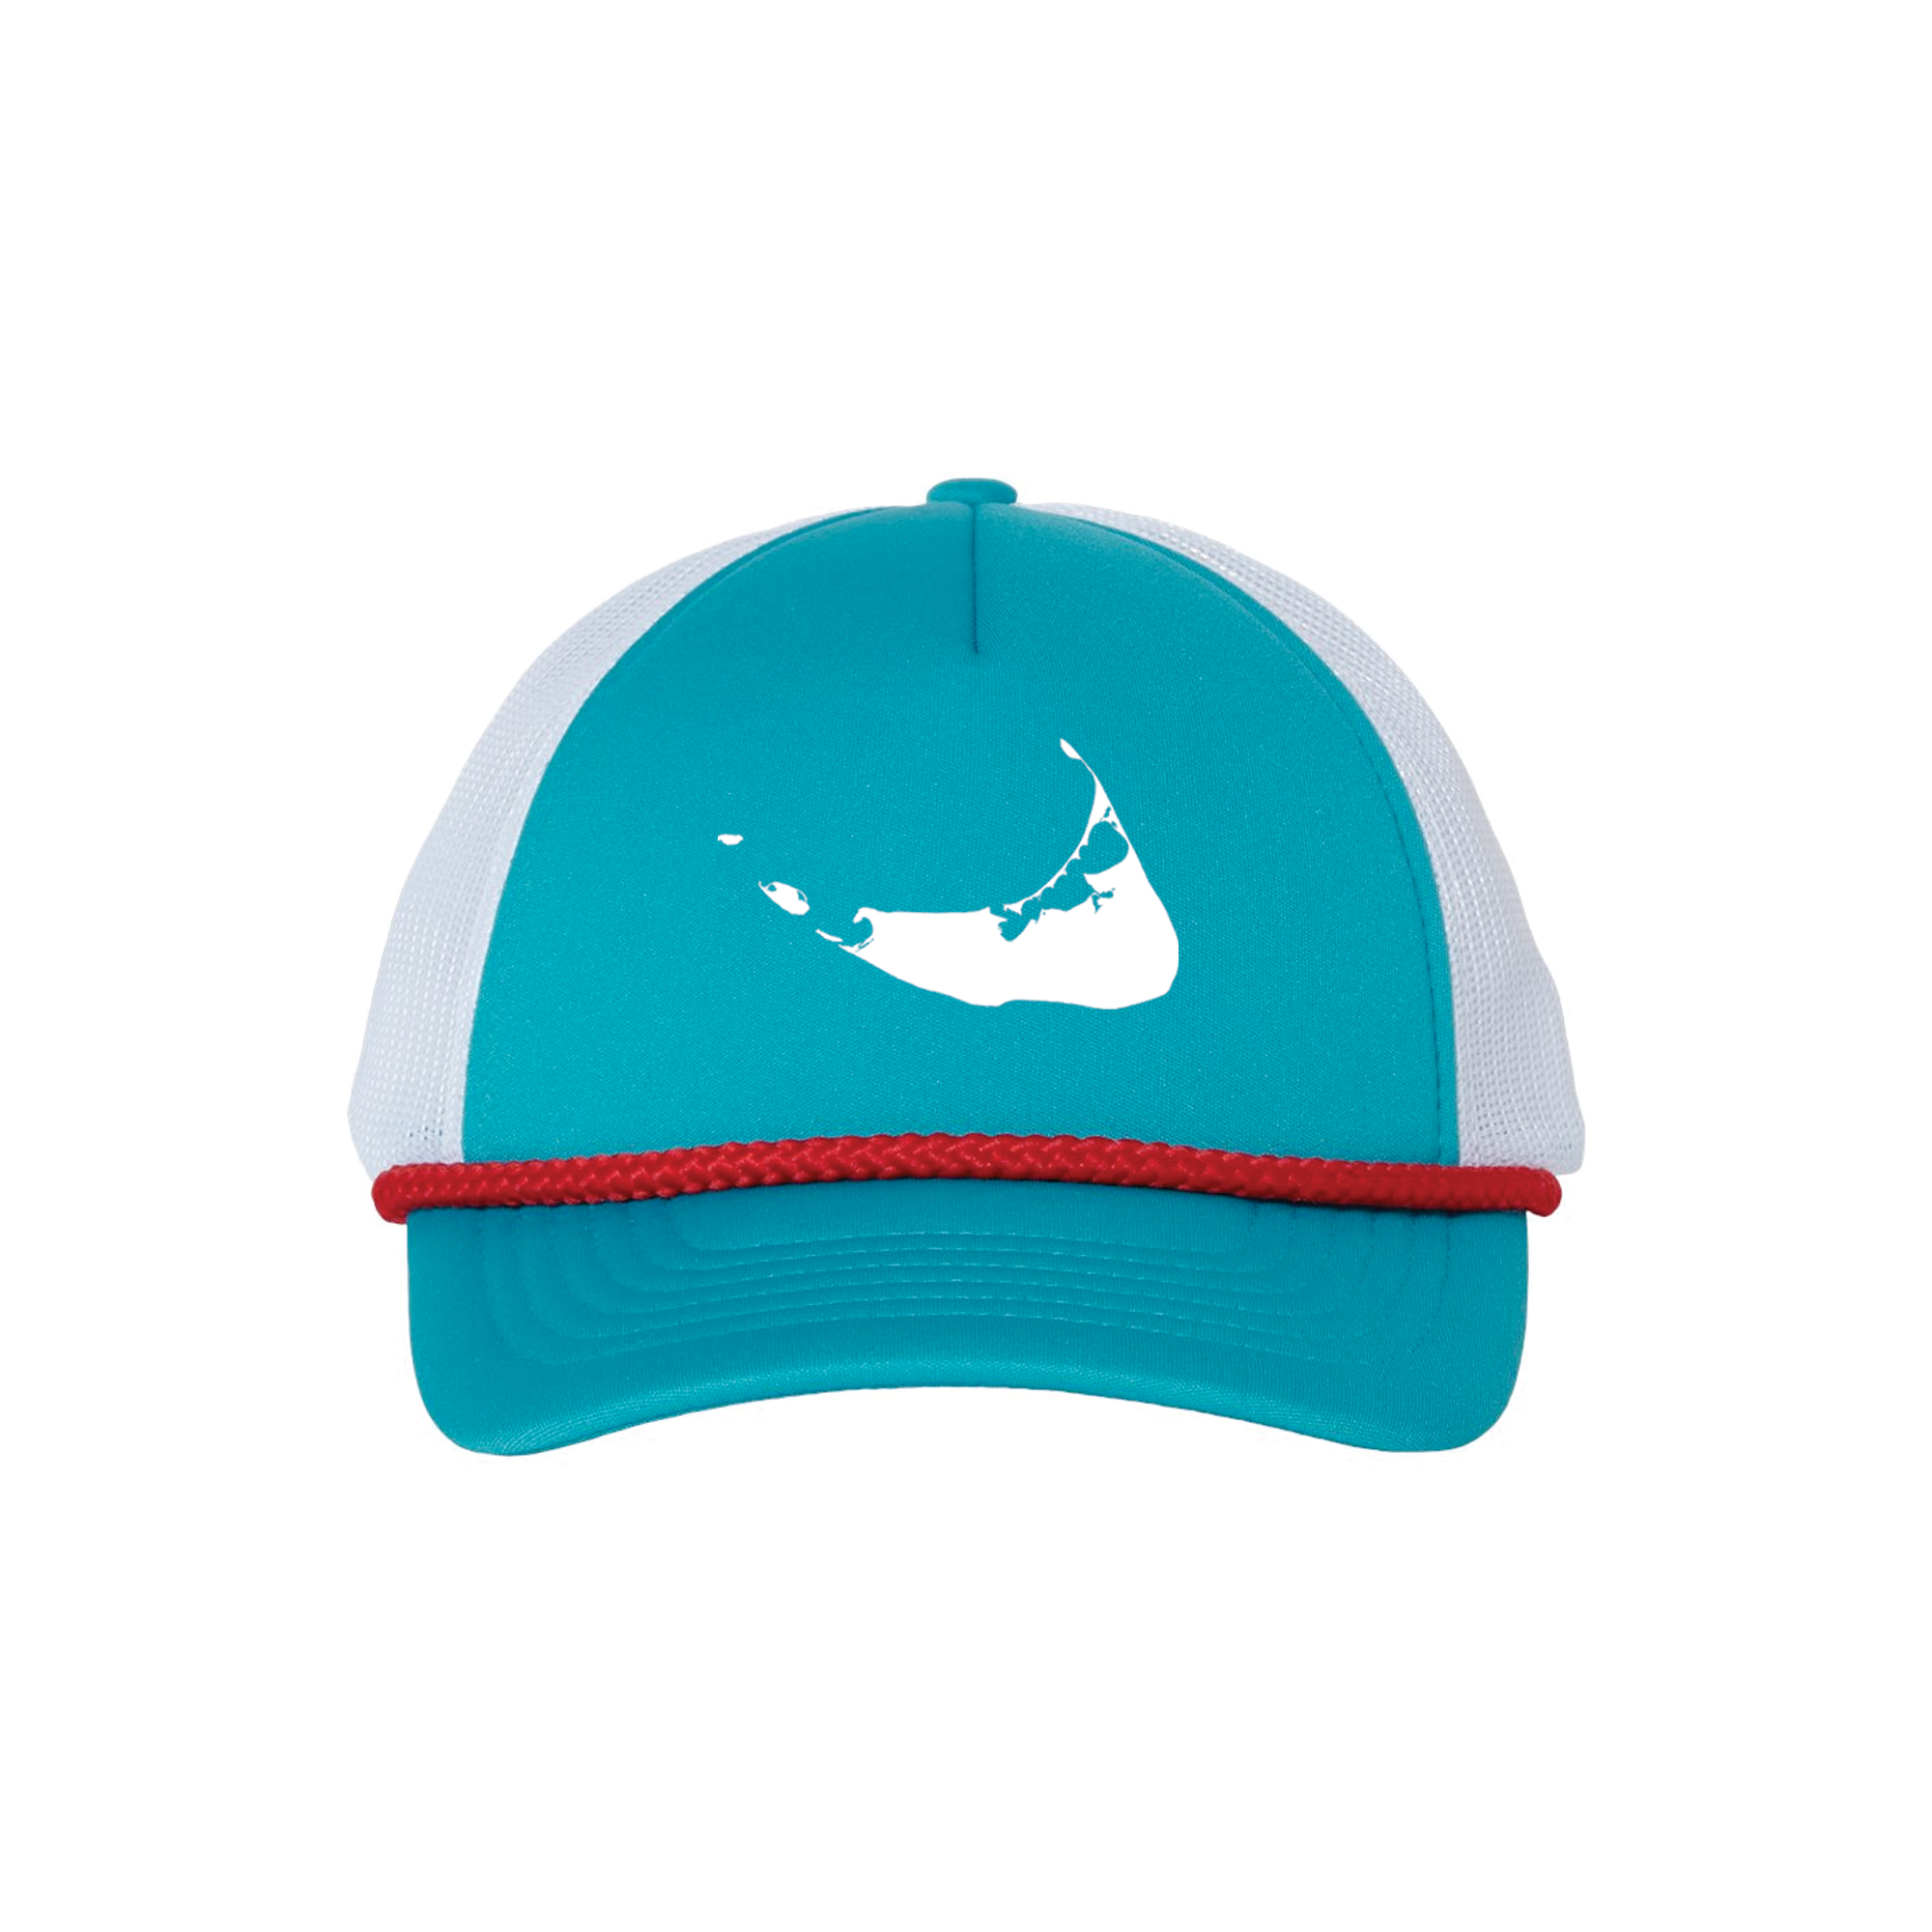 Nantucket Island Trucker Hat with Rope (Teal/White, White, Red)